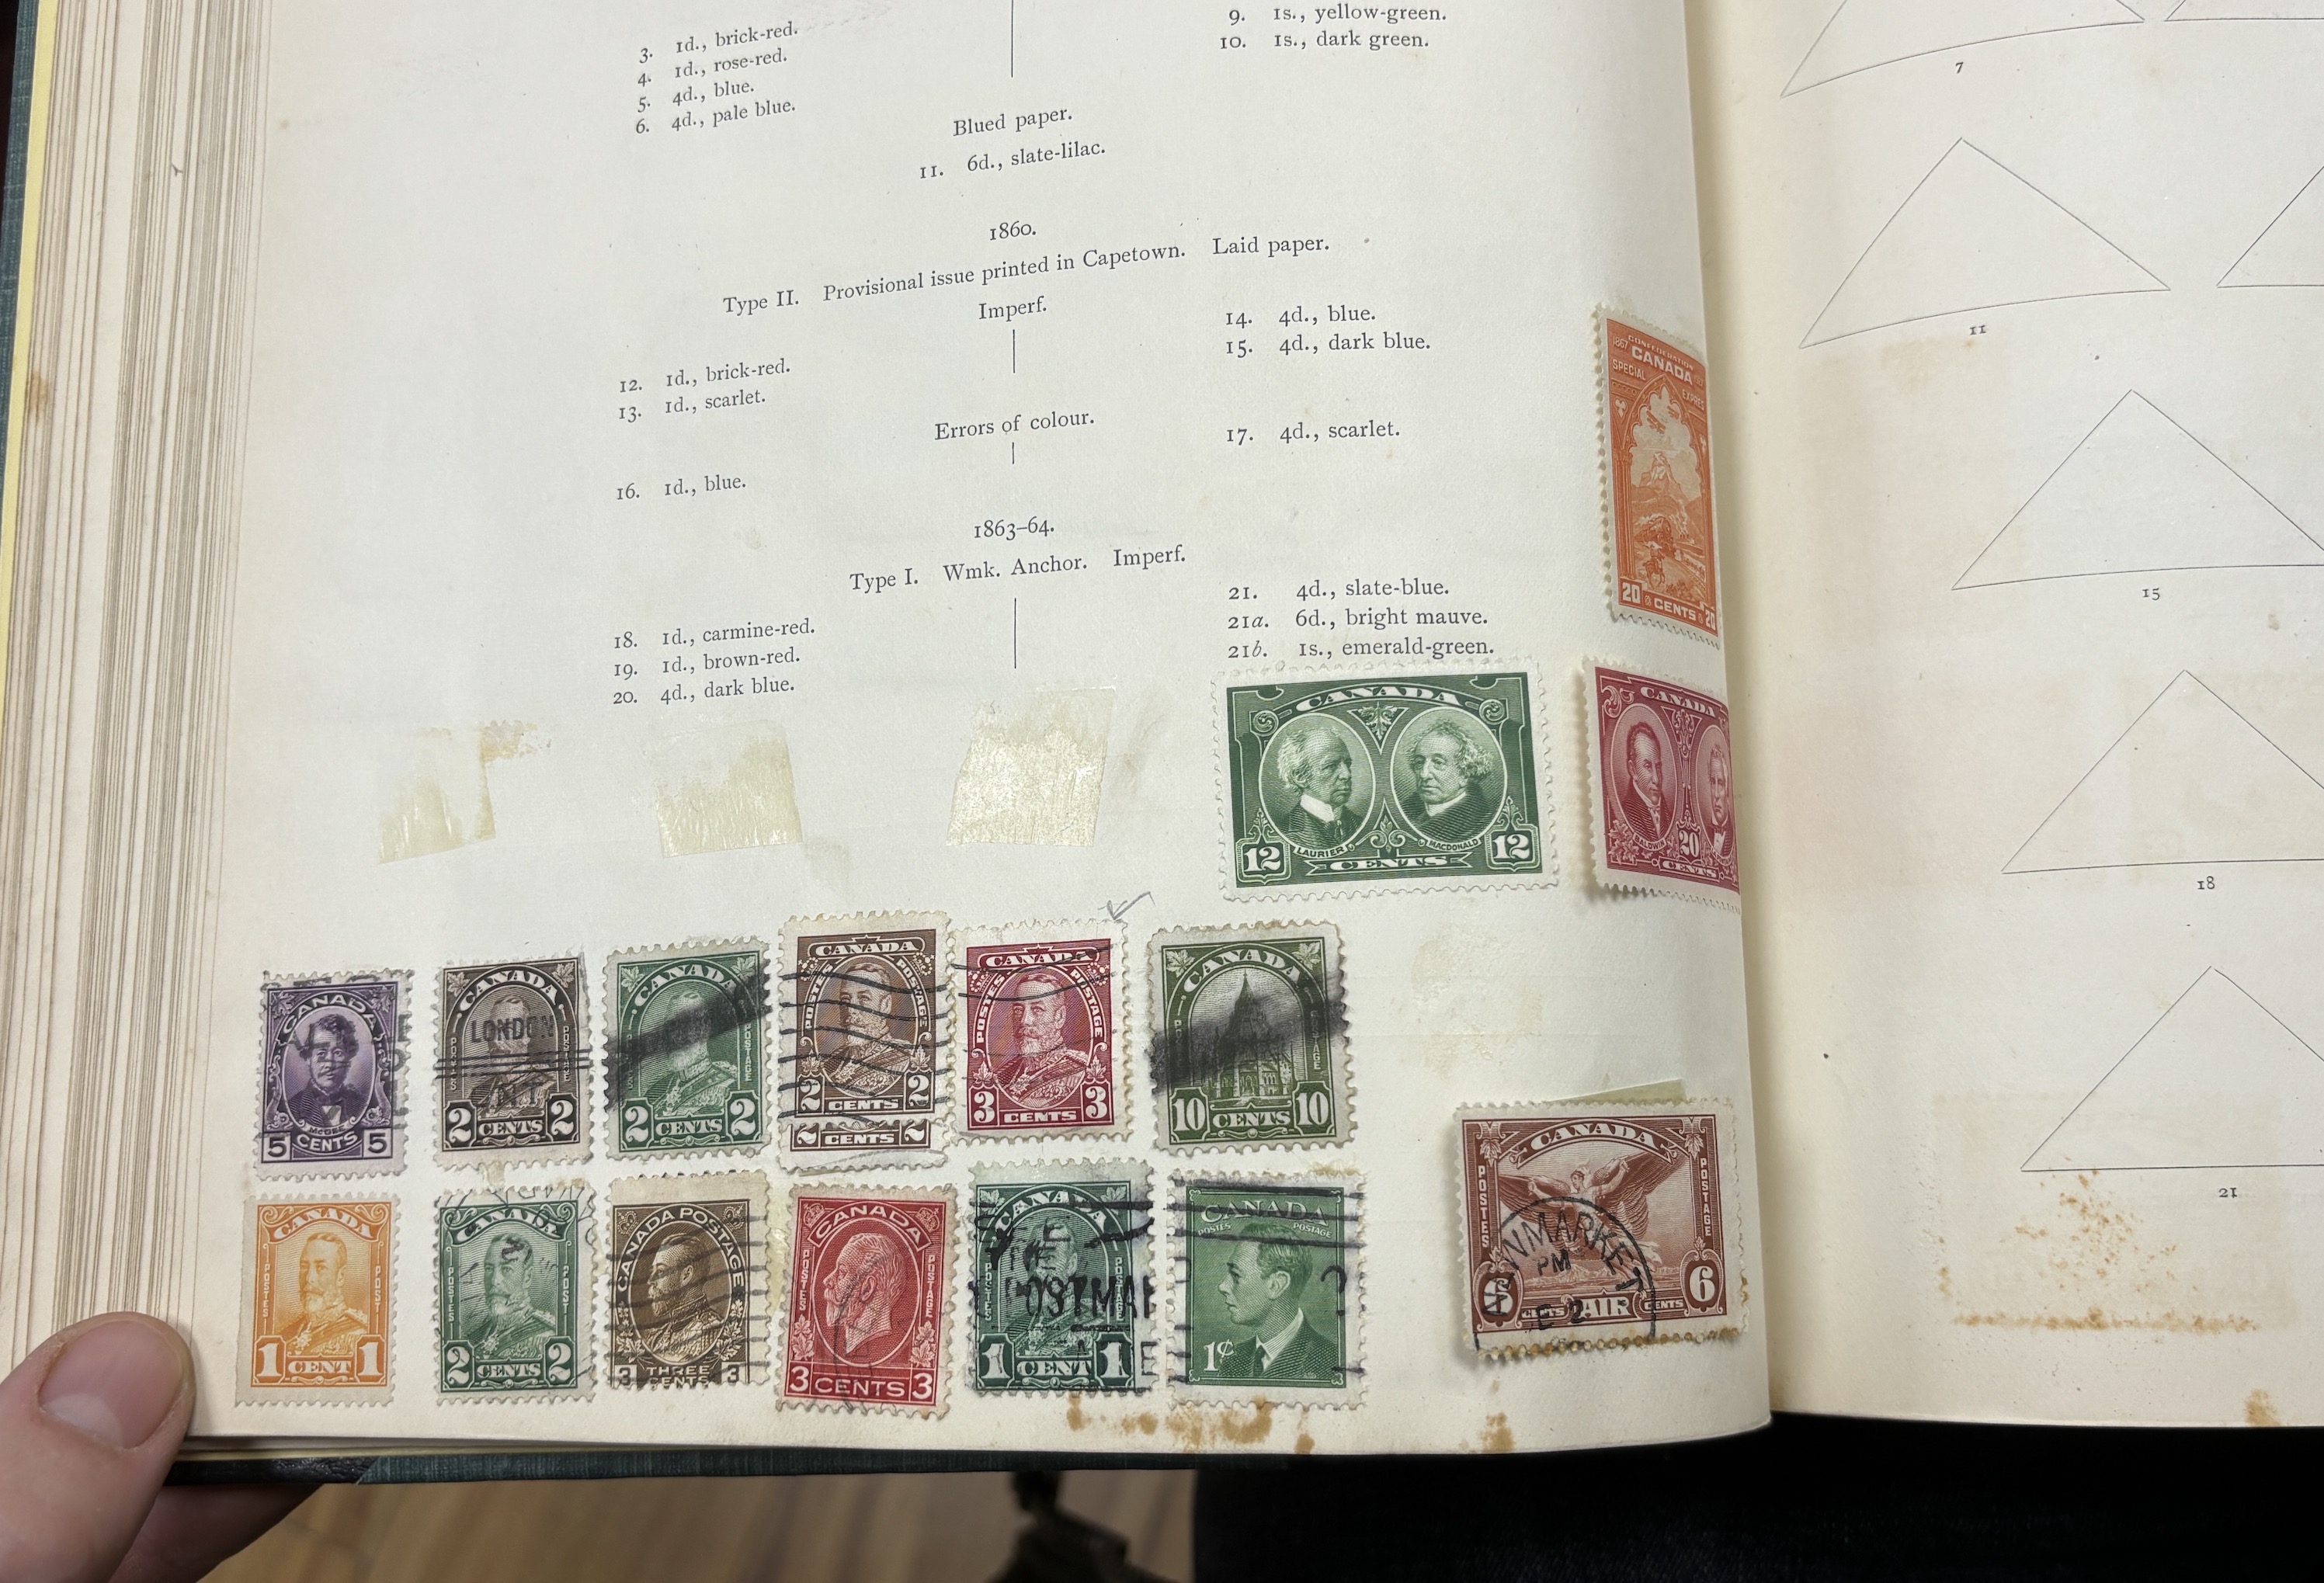 The Imperial Postage Stamp Album in three volumes, containing a stamp collection which includes some early stamps from Great Britain and the Empire, a Penny Black, early penny reds, and twopenny blues, etc. together with